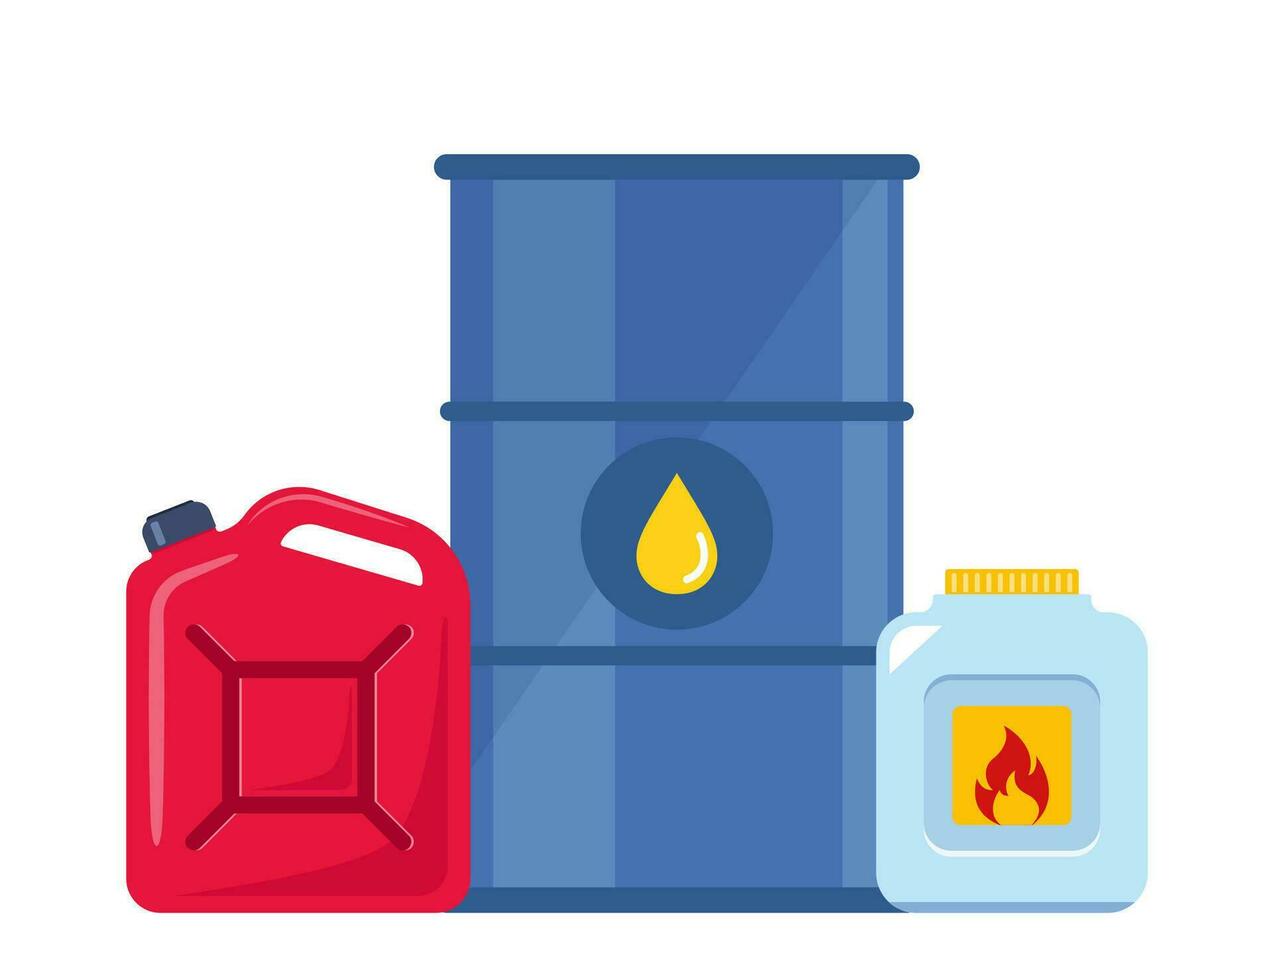 Chemical containers, jerrycan, barrel. Steel storage cask for oil fuel. Gas and petroleum cask. Plastic bottle with flammable liquid. Vector illustration.